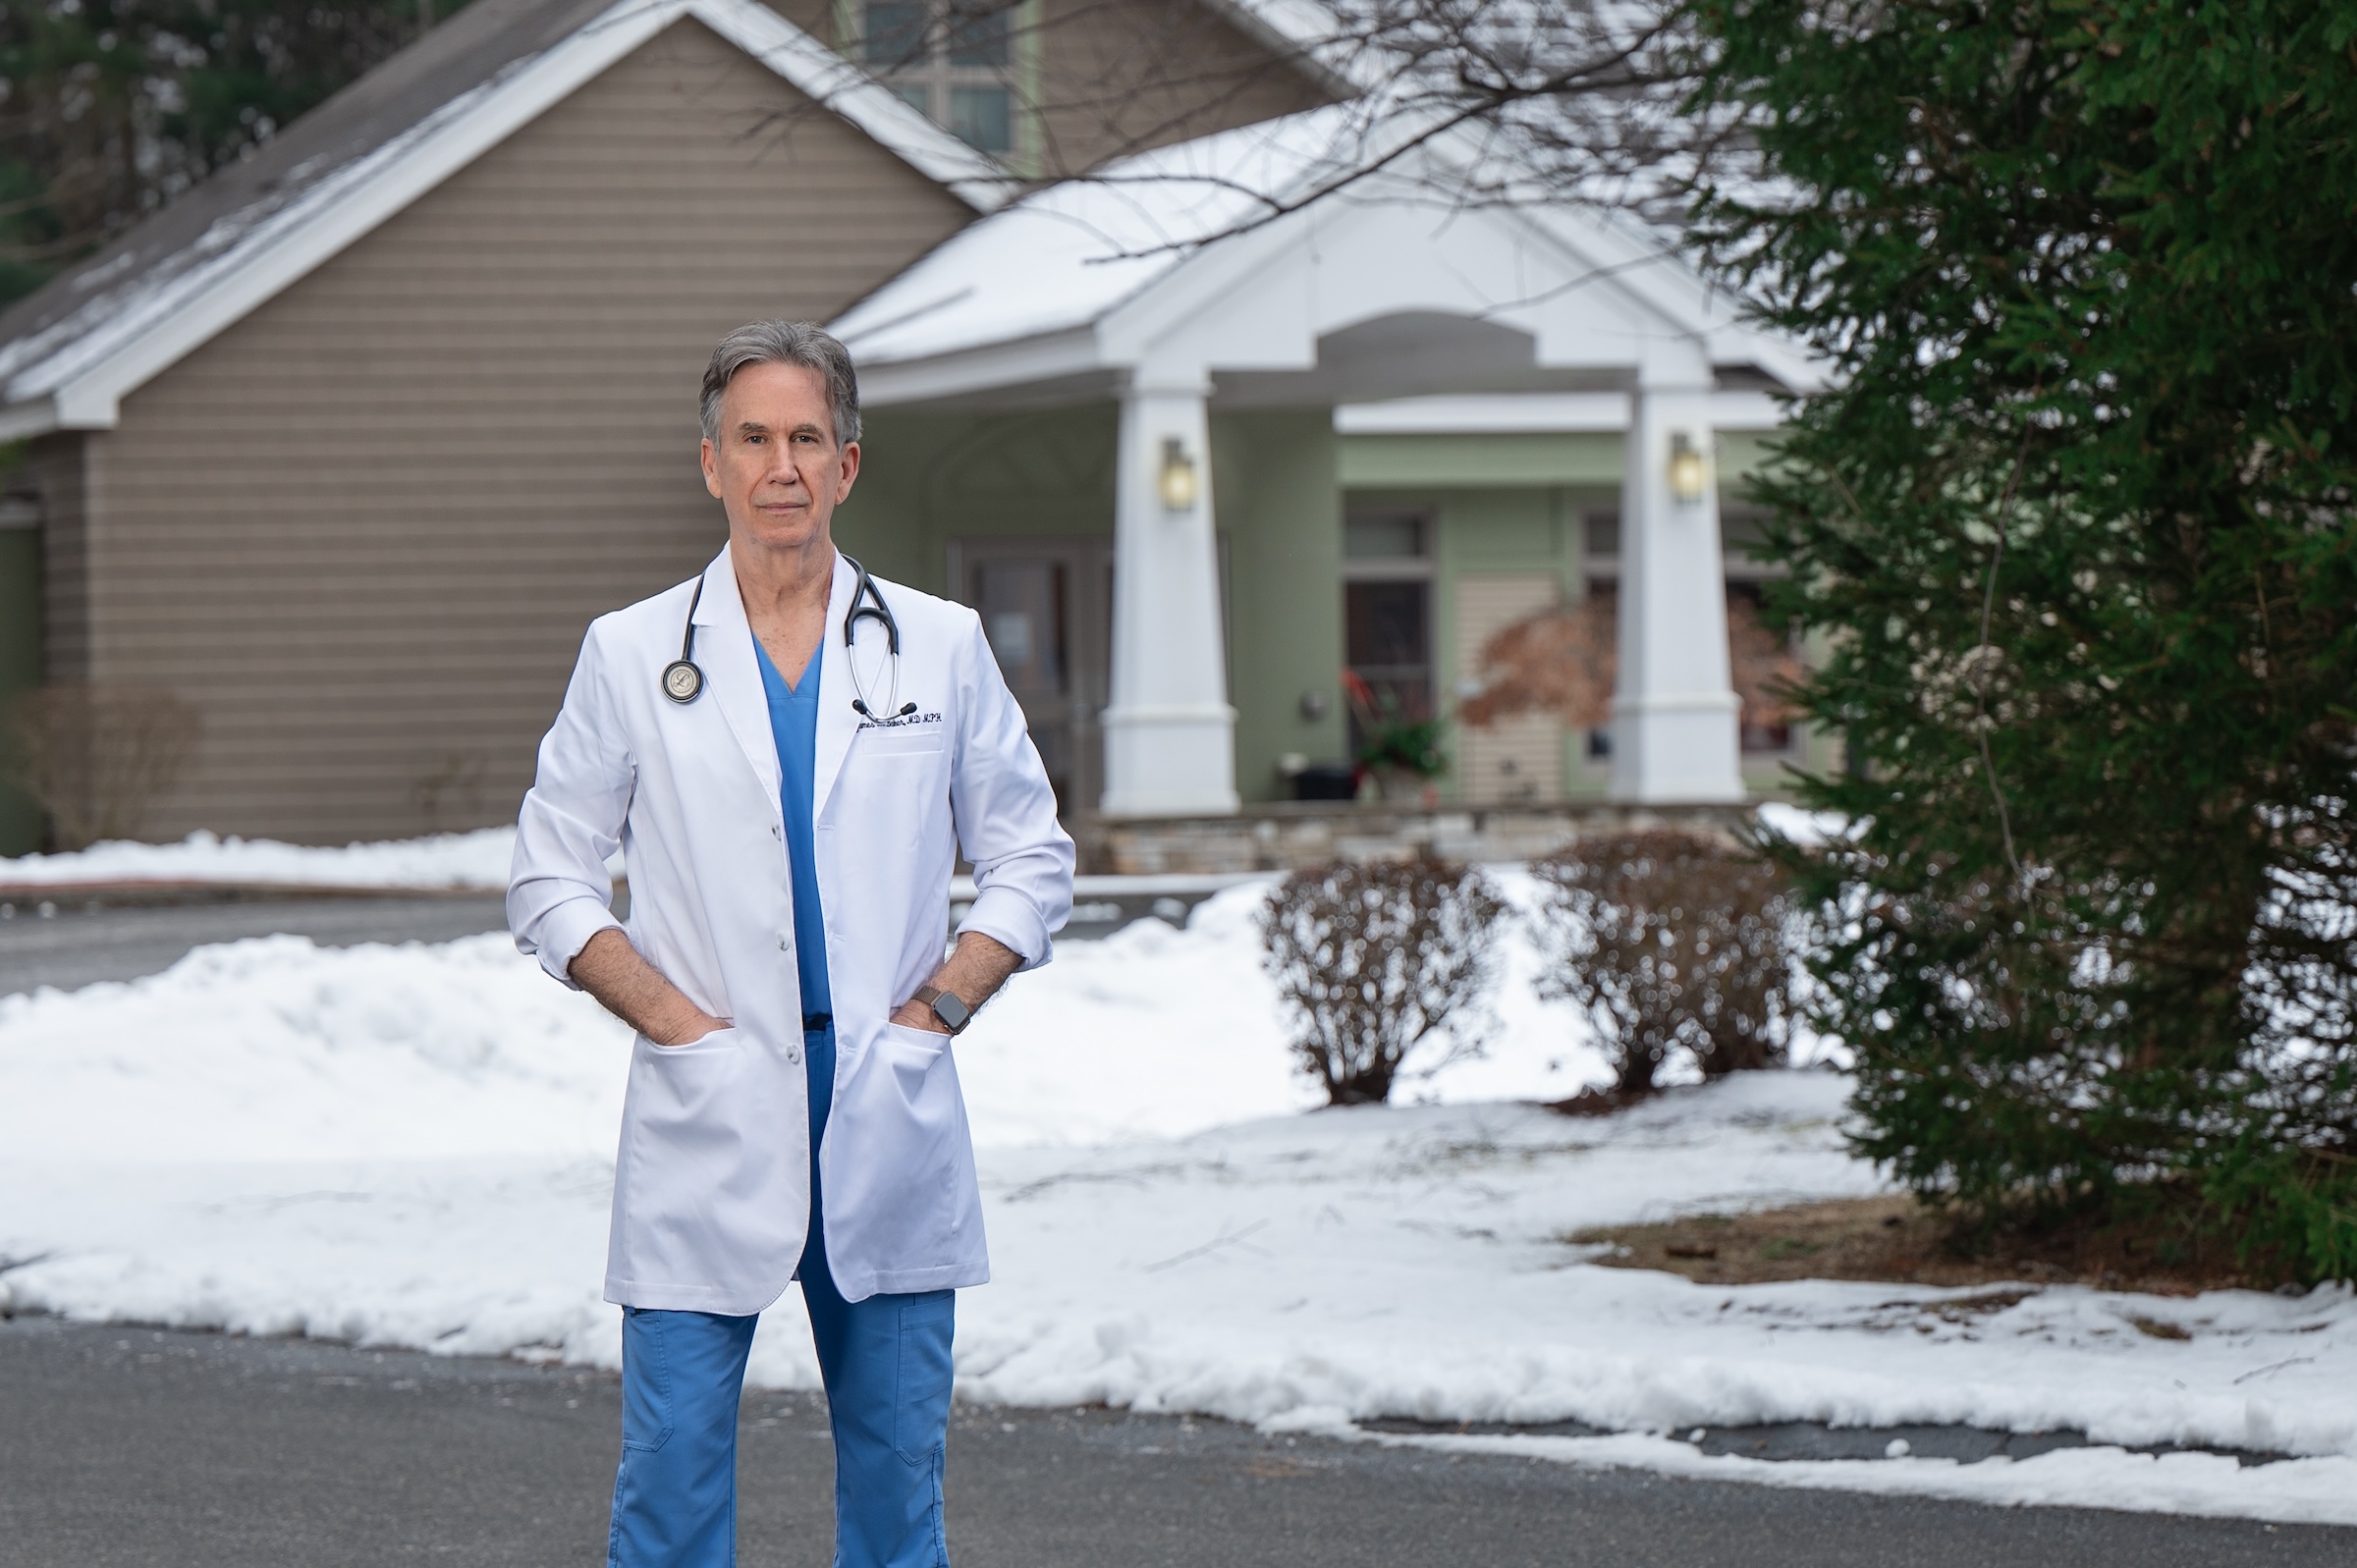 This Mass. doctor hopes his son’s addiction story can help others